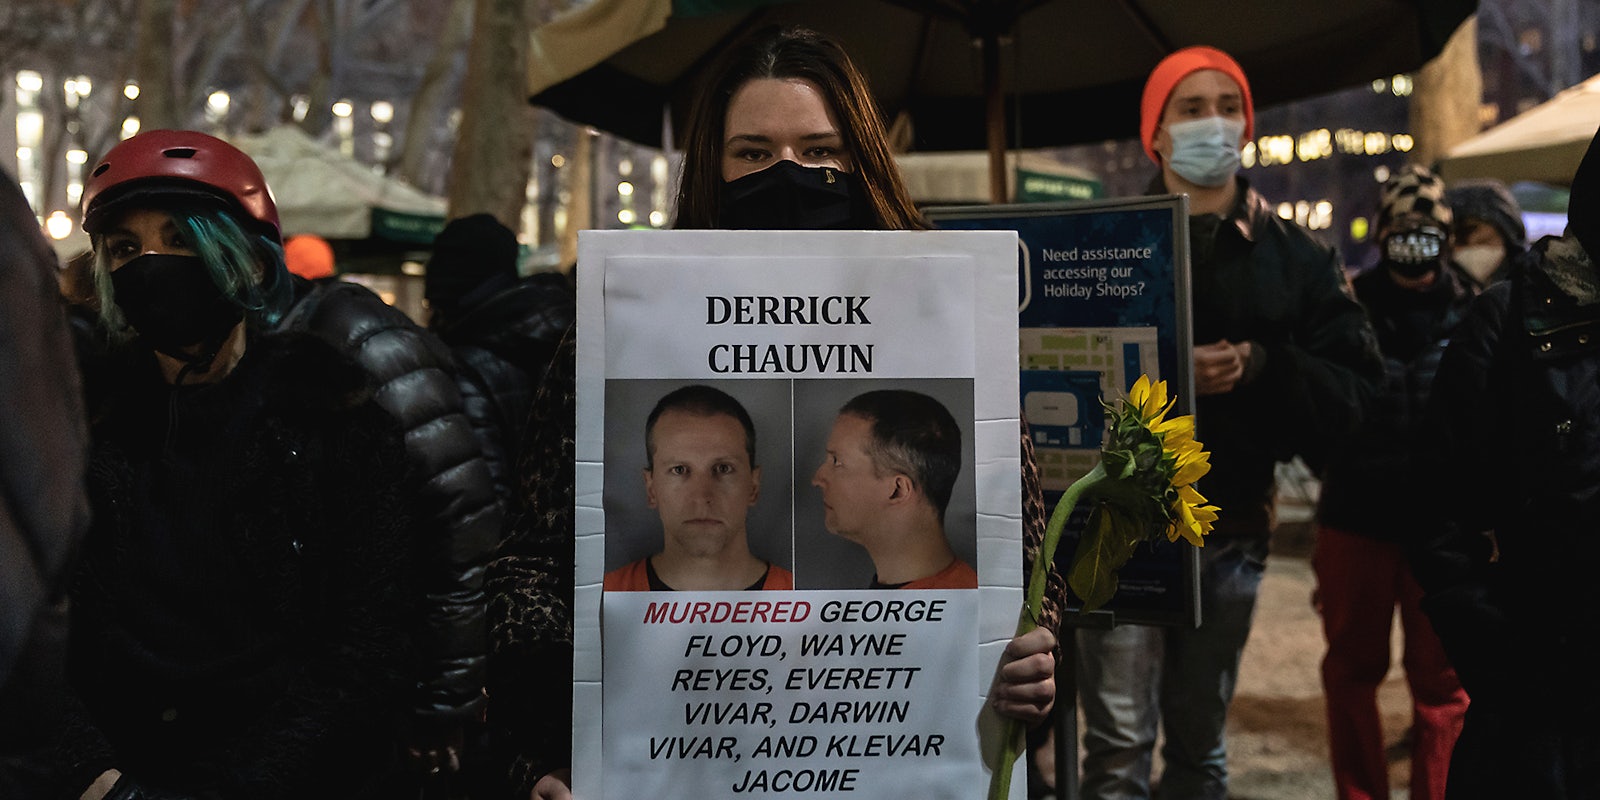 A woman holding a wanted sign for Derek Chauvin.